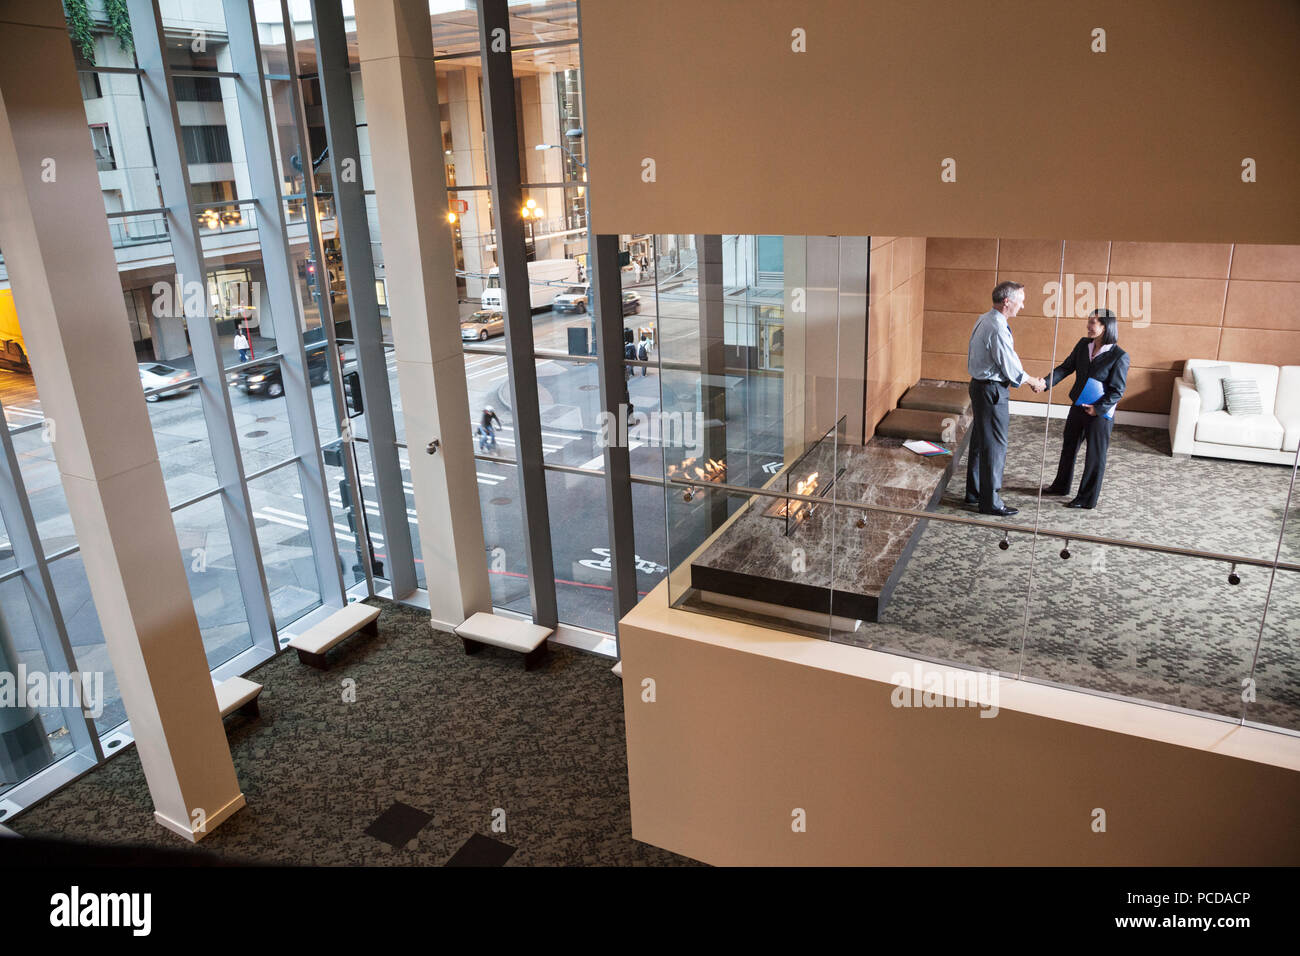 A large building, lobby, view looking into an office with glass walls, two business people talking. Stock Photo